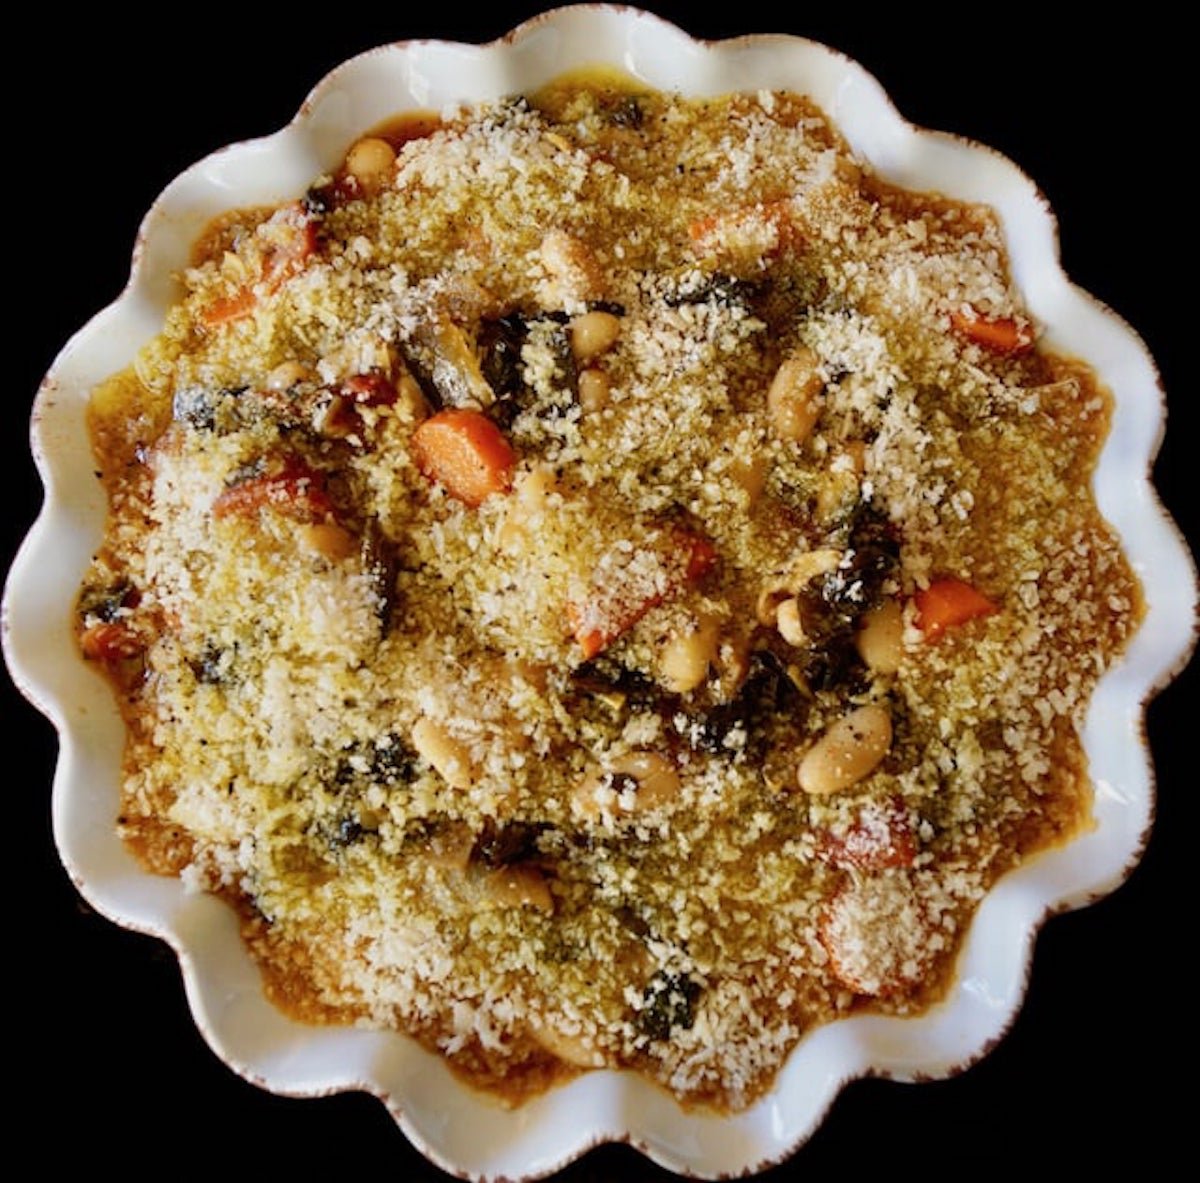 Crimped white pie plate filled with white beans, carrots, tomato and kale, topped with rbead crumbs for vegetarian .cassoulet